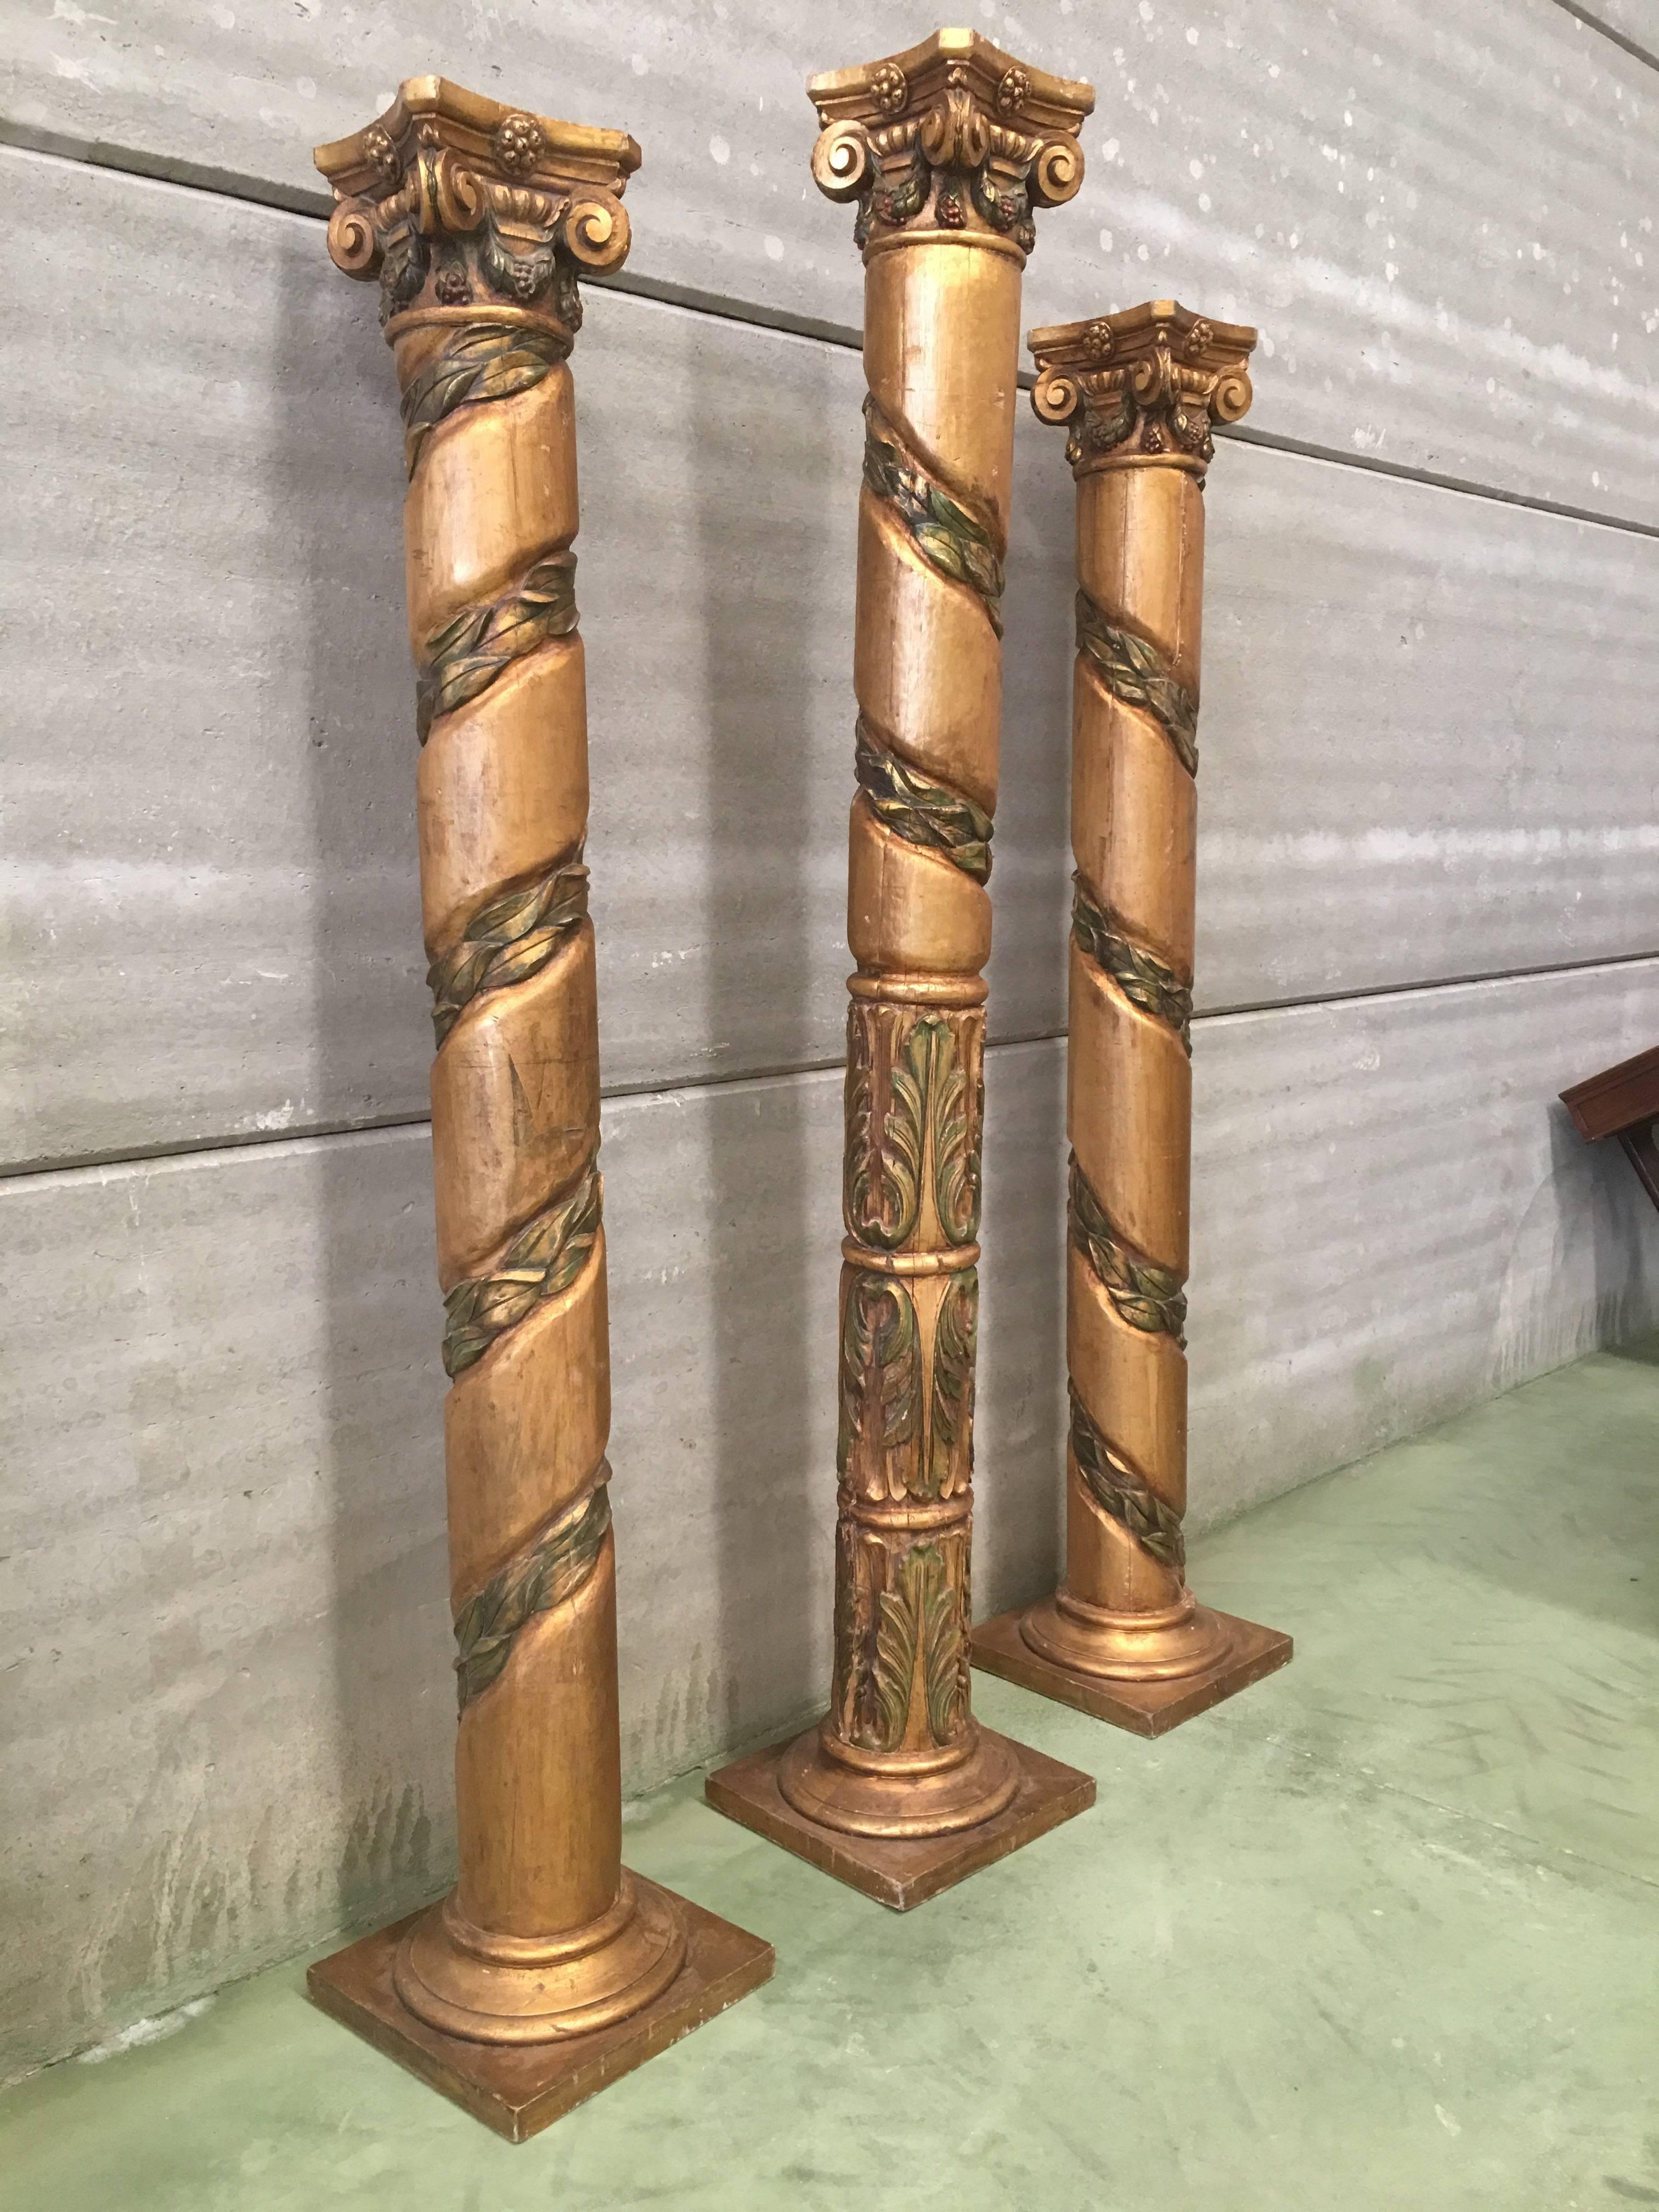 Set of three 20th century Spanish carved gilt and polychrome wood columns
A spectacular set of 20th century Spanish Mannerist (Late Renaissance) carved gilt and polychrome wood columns, with Corinthian tops and herringbone motif. The gilding and